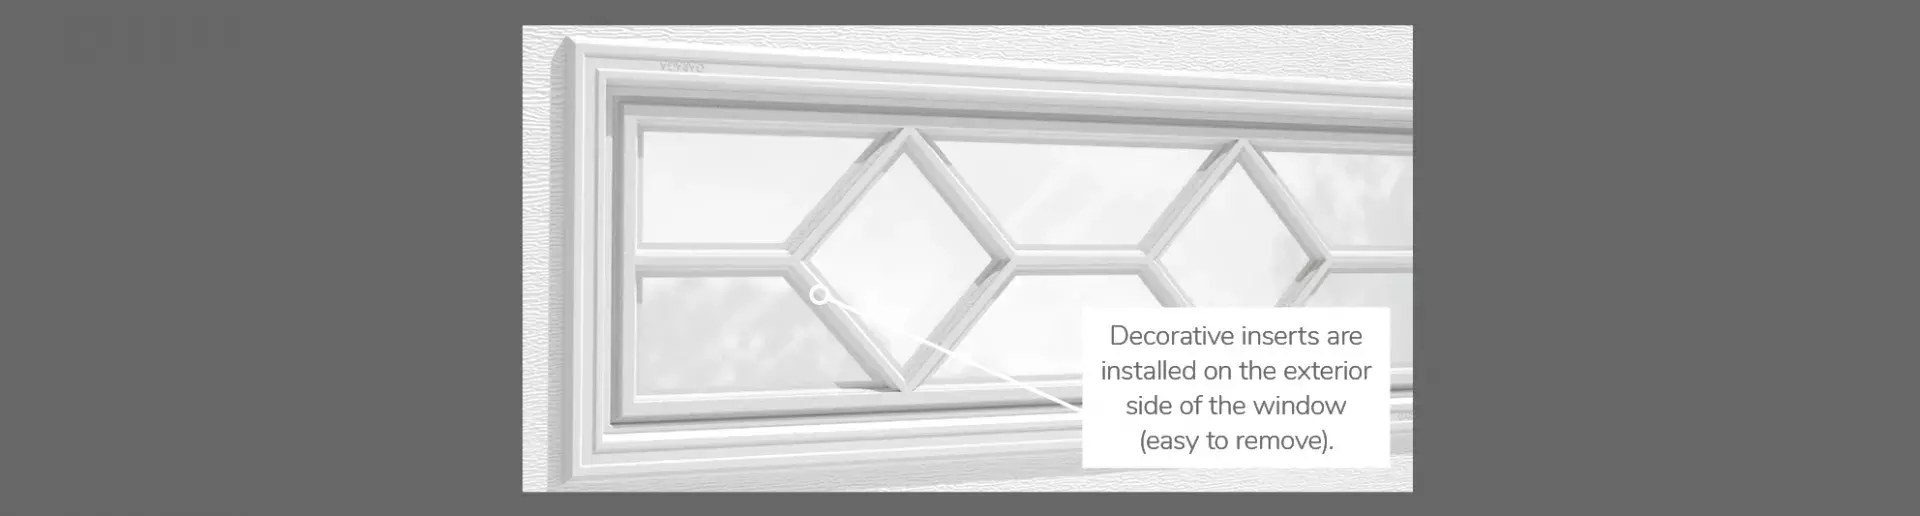 Waterton Decorative Insert, 40" x 13" or 41" x 16", available for door R-16, R-12, 3 layers - Polystyrene, 2 layers - Polystyrene and Non-insulated